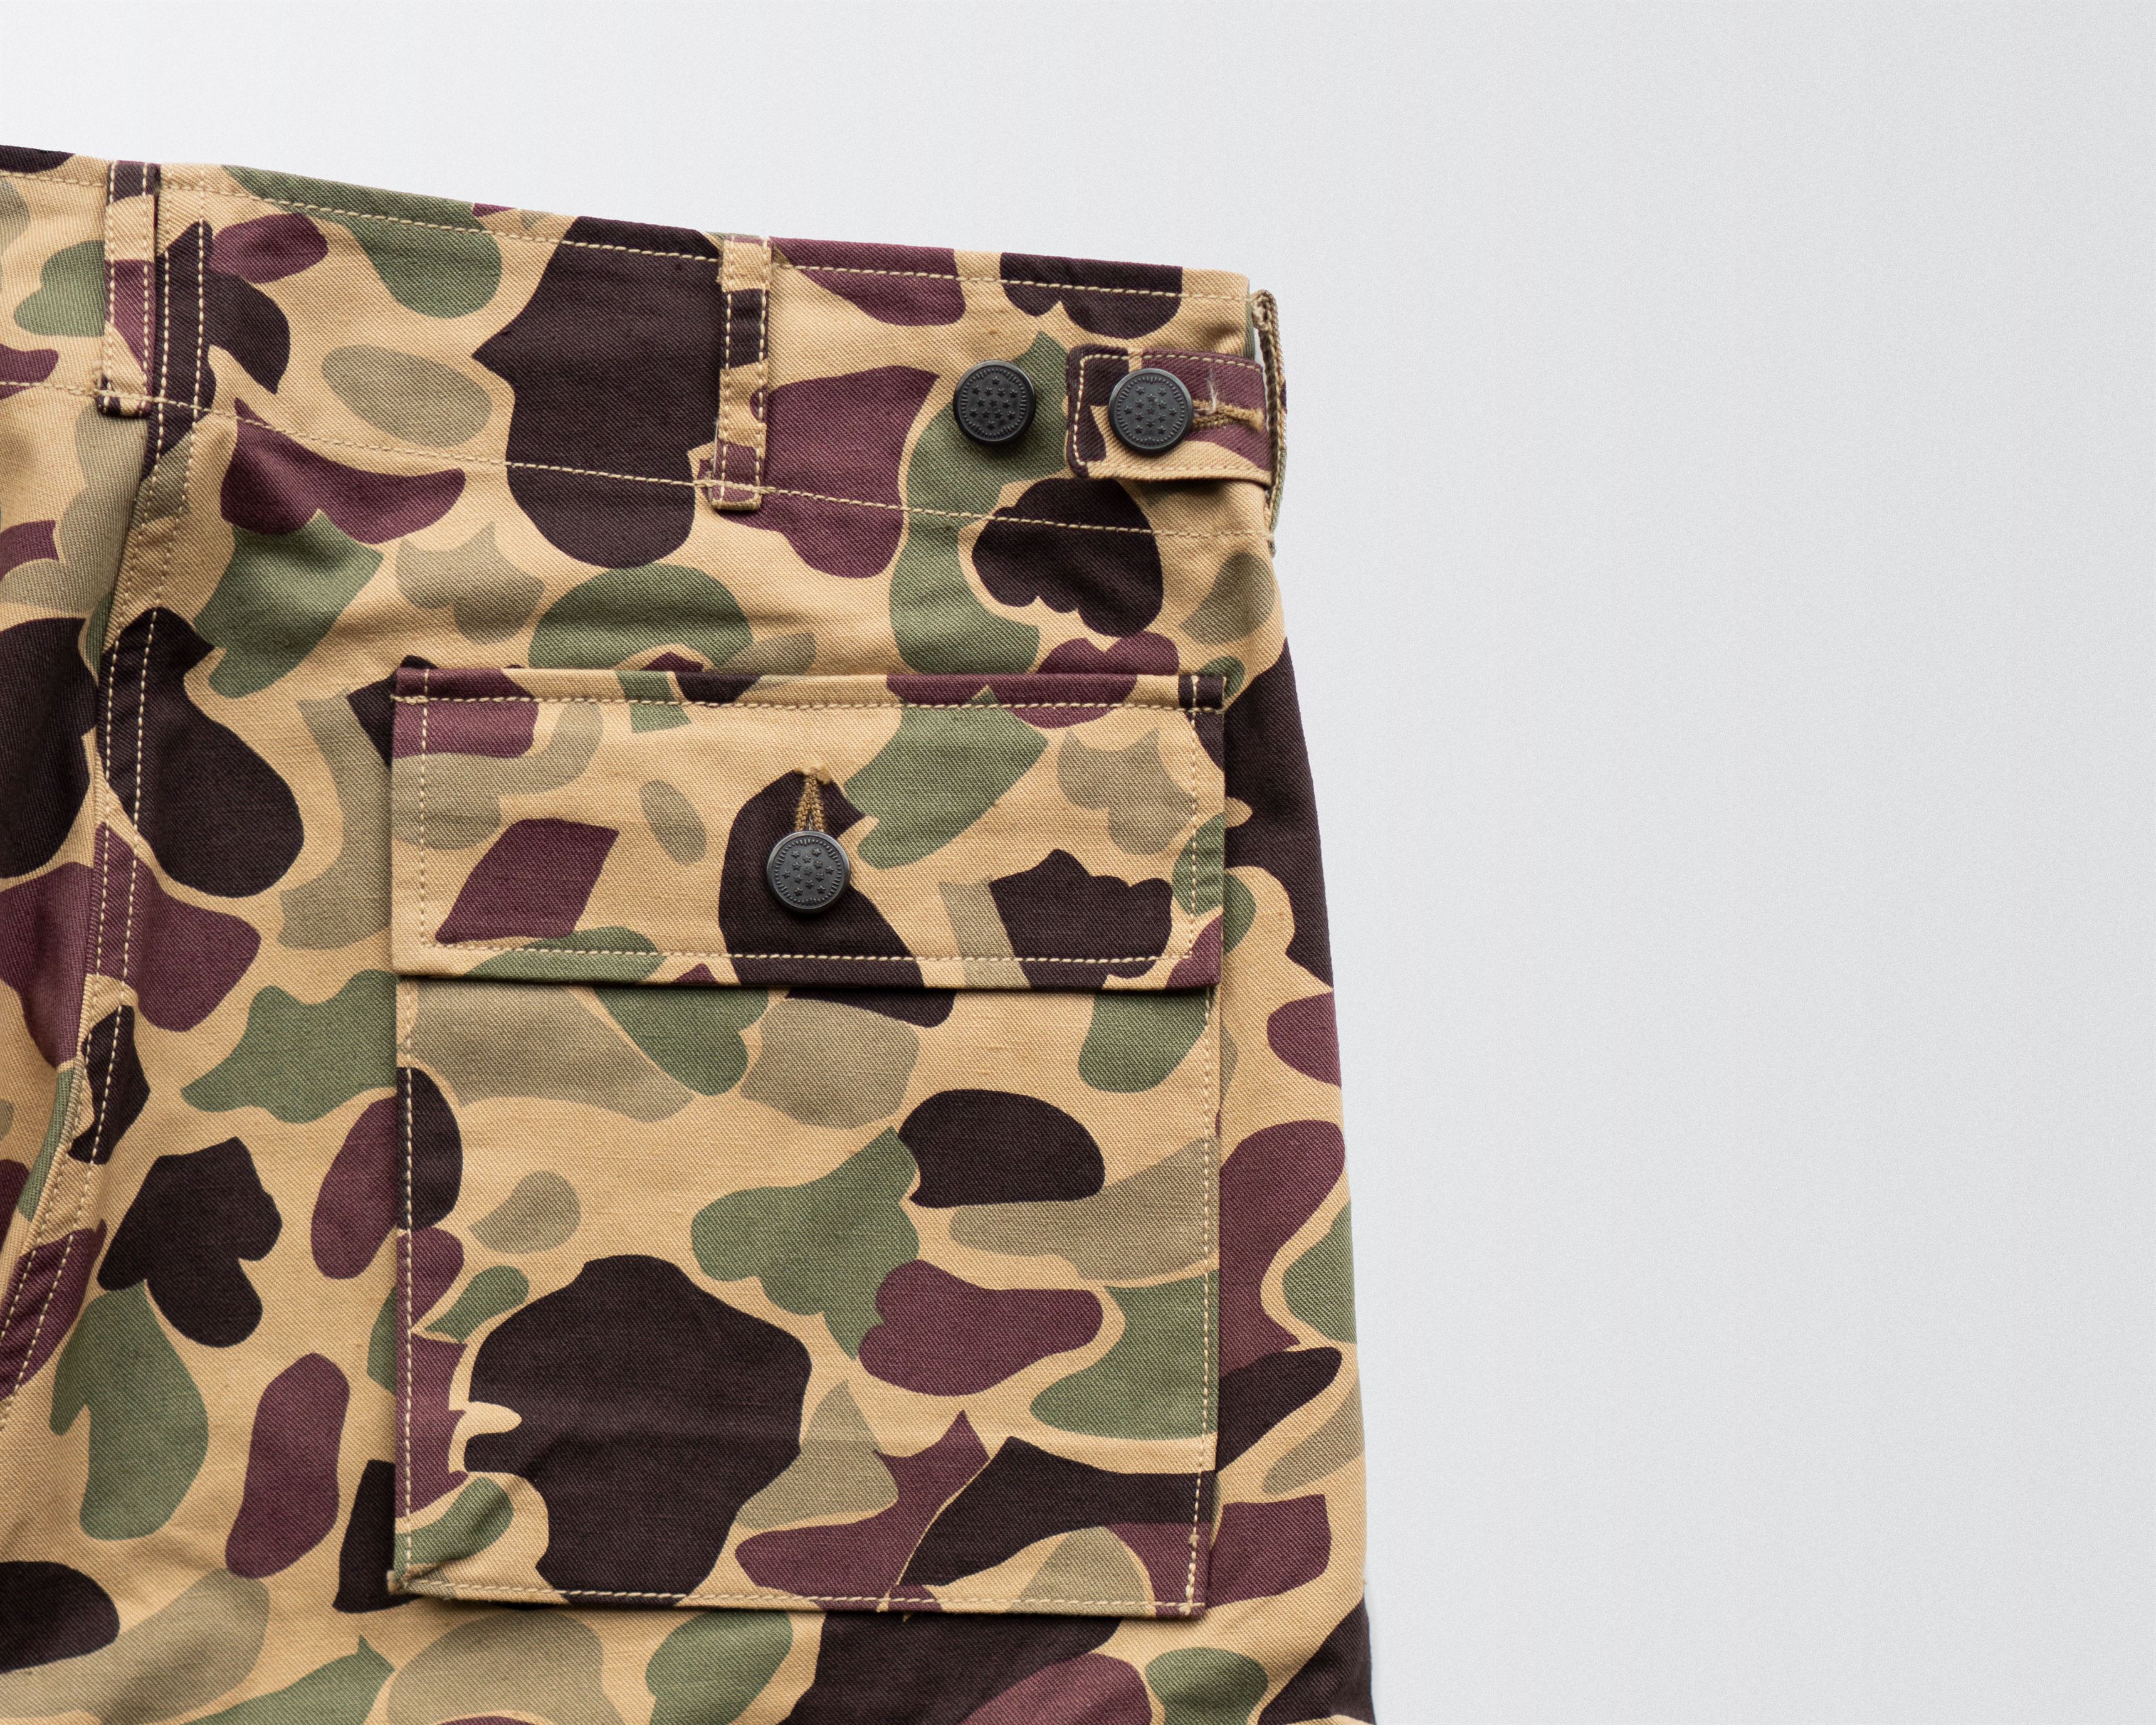 Beo Gam Camouflage Shorts | MP21006